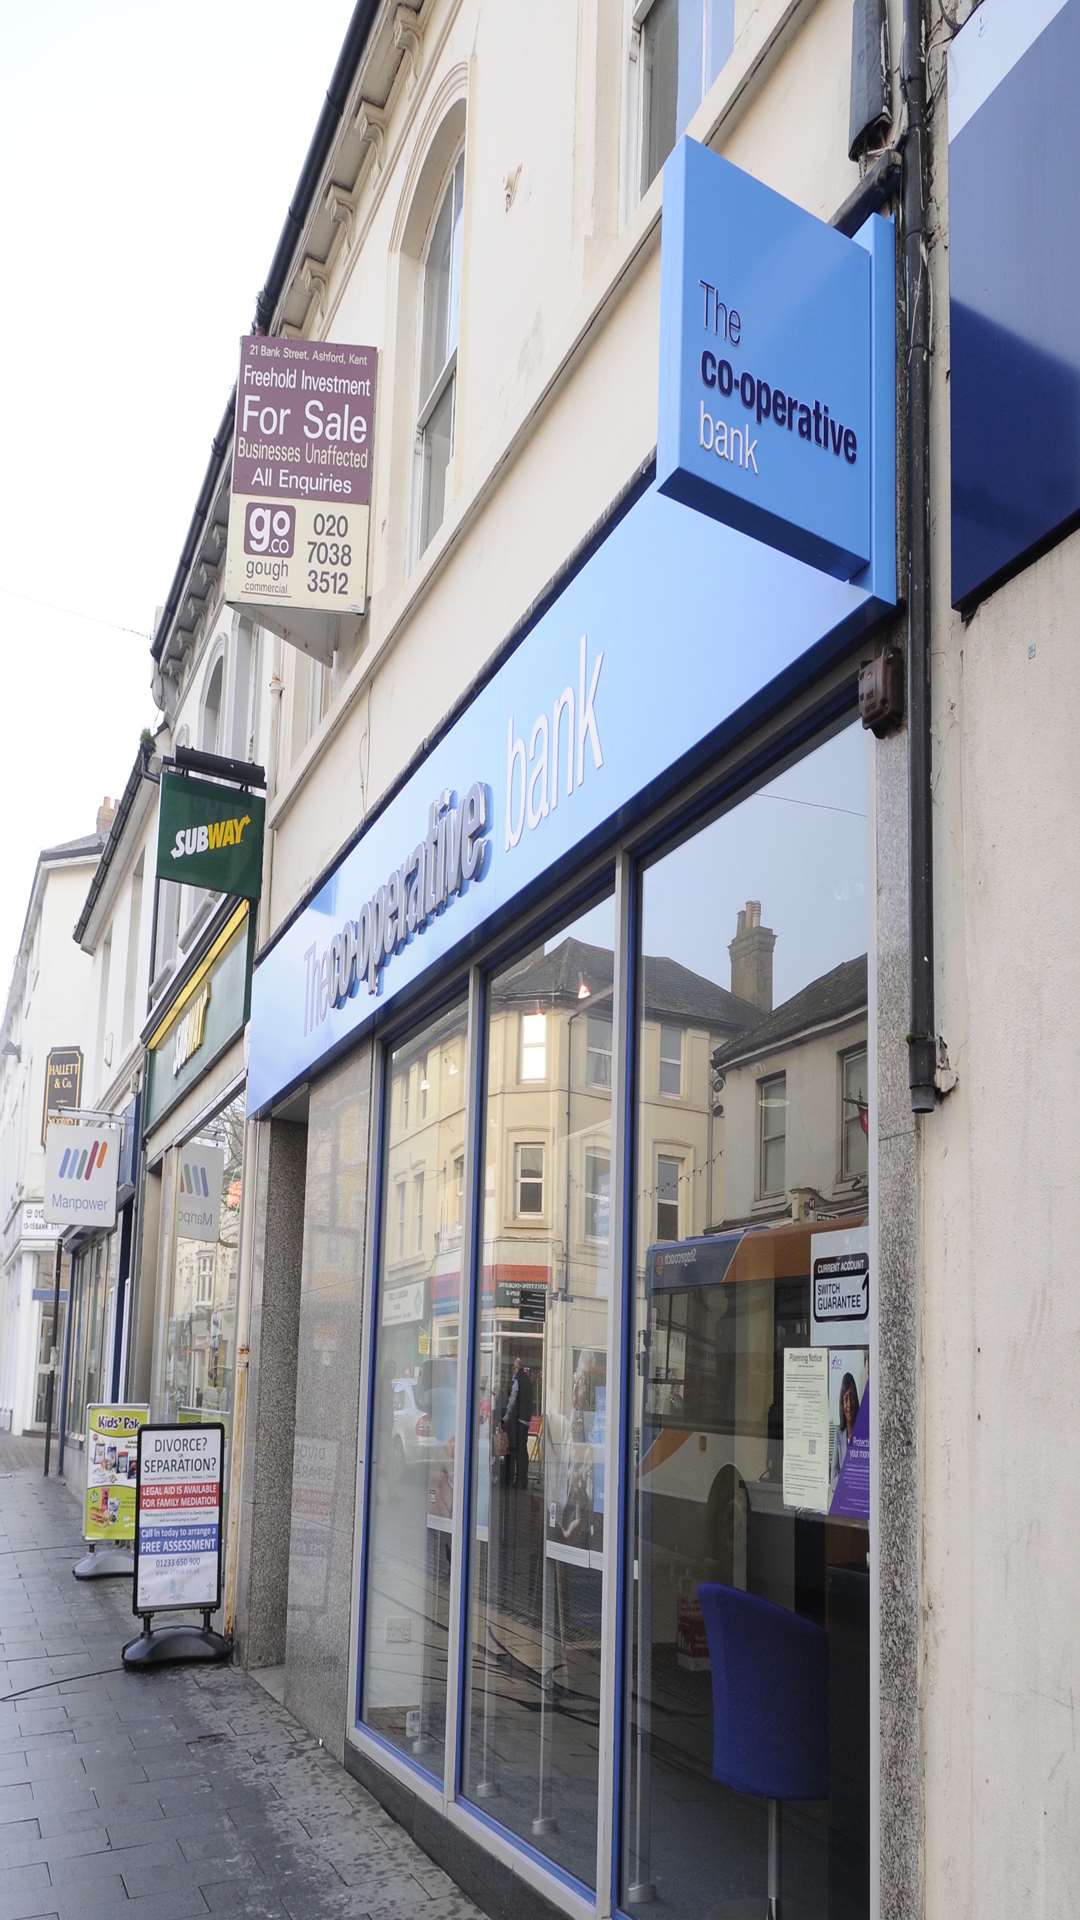 The Co-operative Bank is closing two branches in Kent